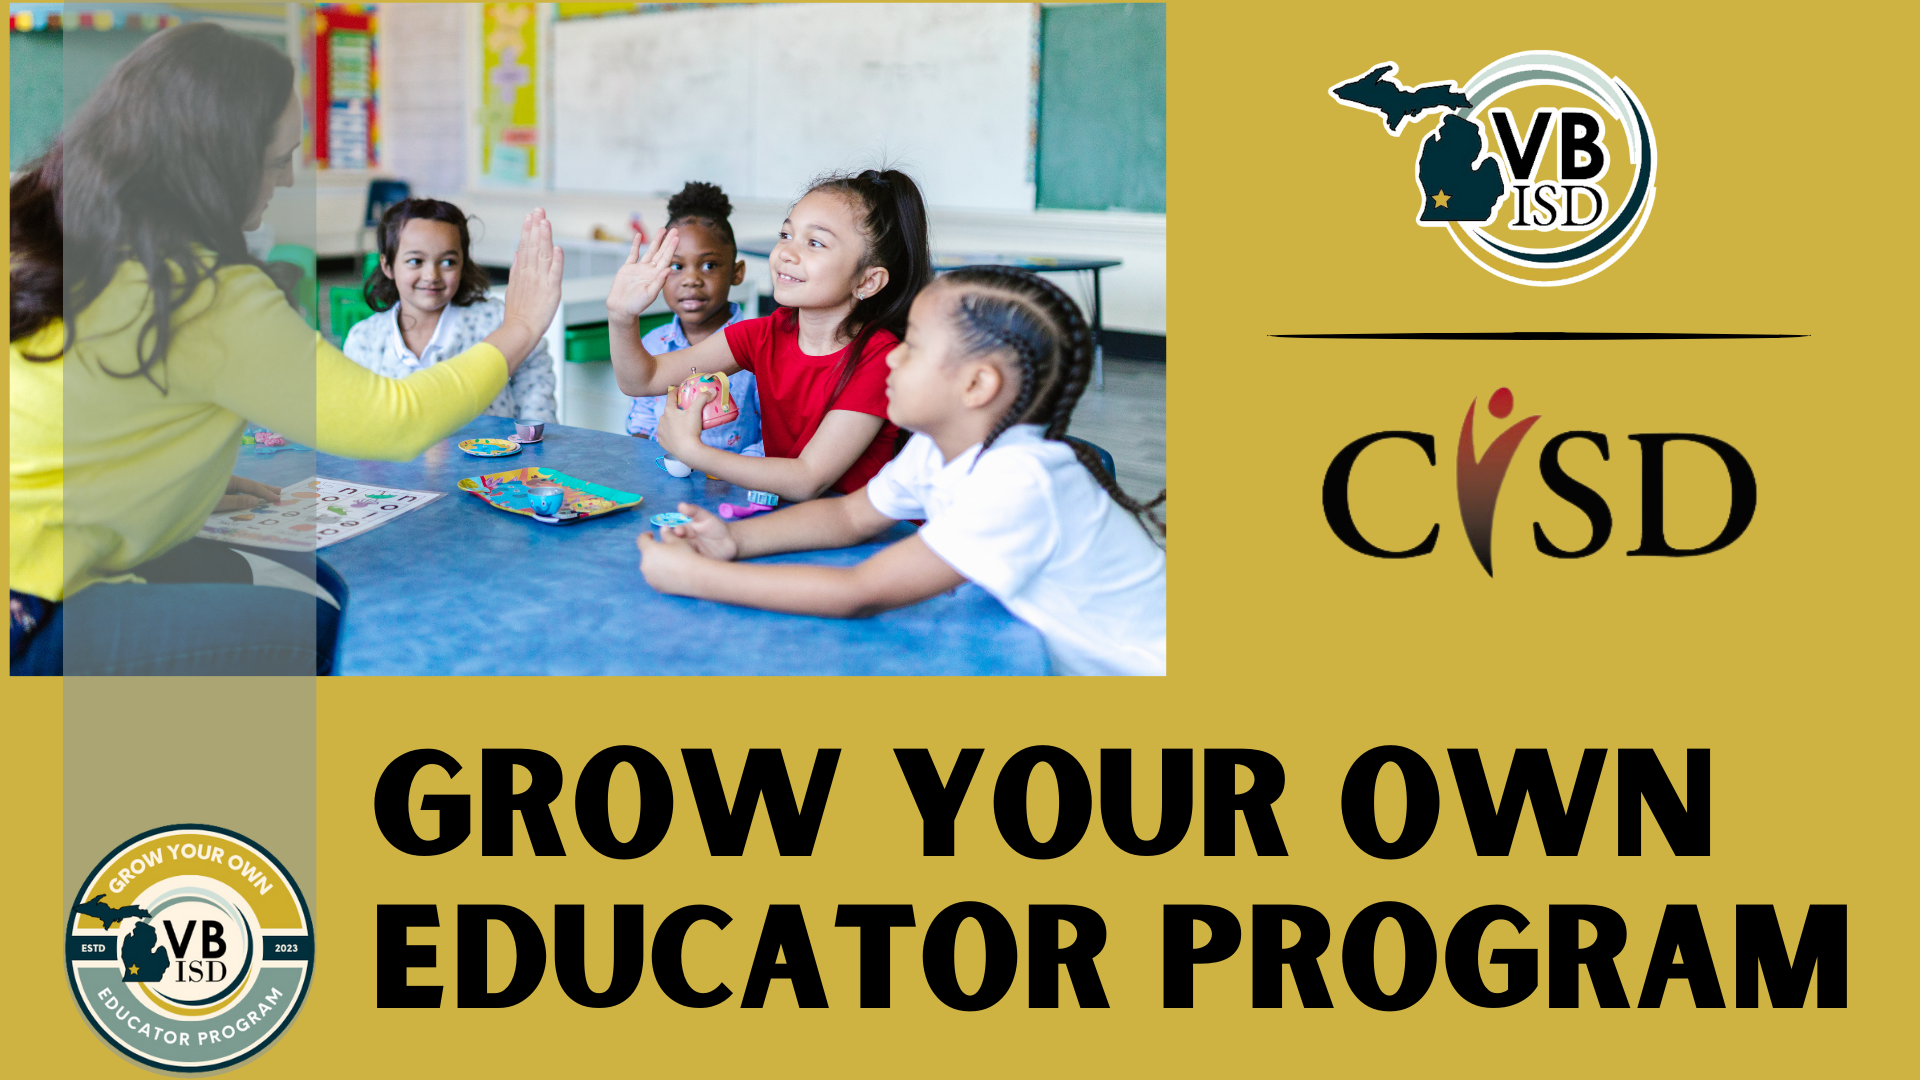 A photo of a teacher high fiving a group of students. To the right is the VBISD logo and the Calhoun ISD logo. Under the photo are the words "Grow Your Own Educator Program"